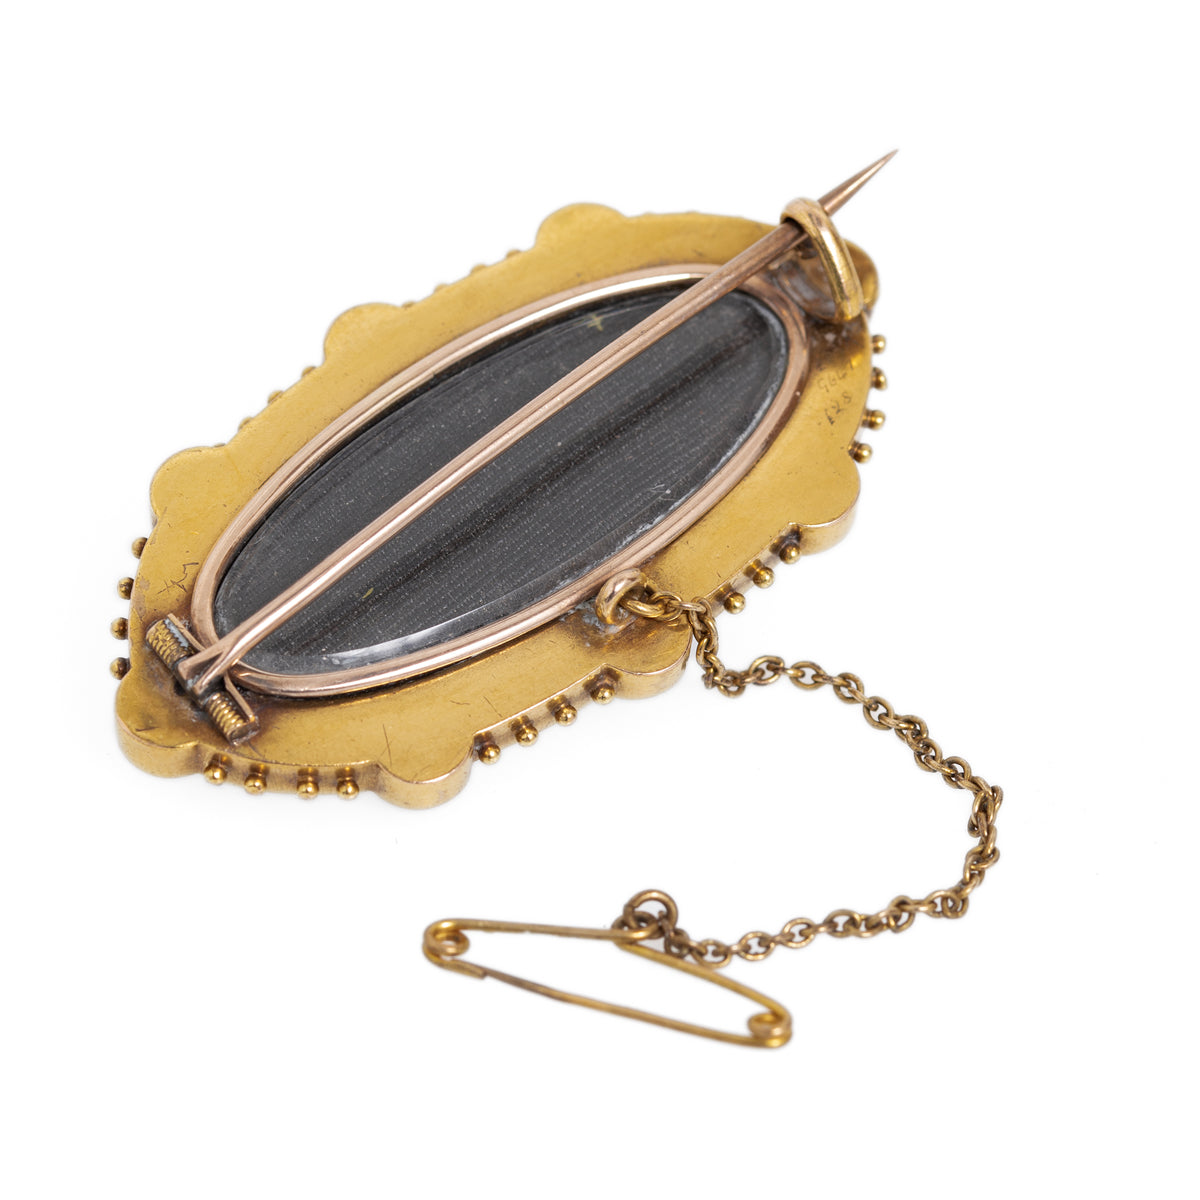 Antique Victorian 18ct Gold, Pearl & Black Onyx Mourning Brooch c.1870 (Code A1061)